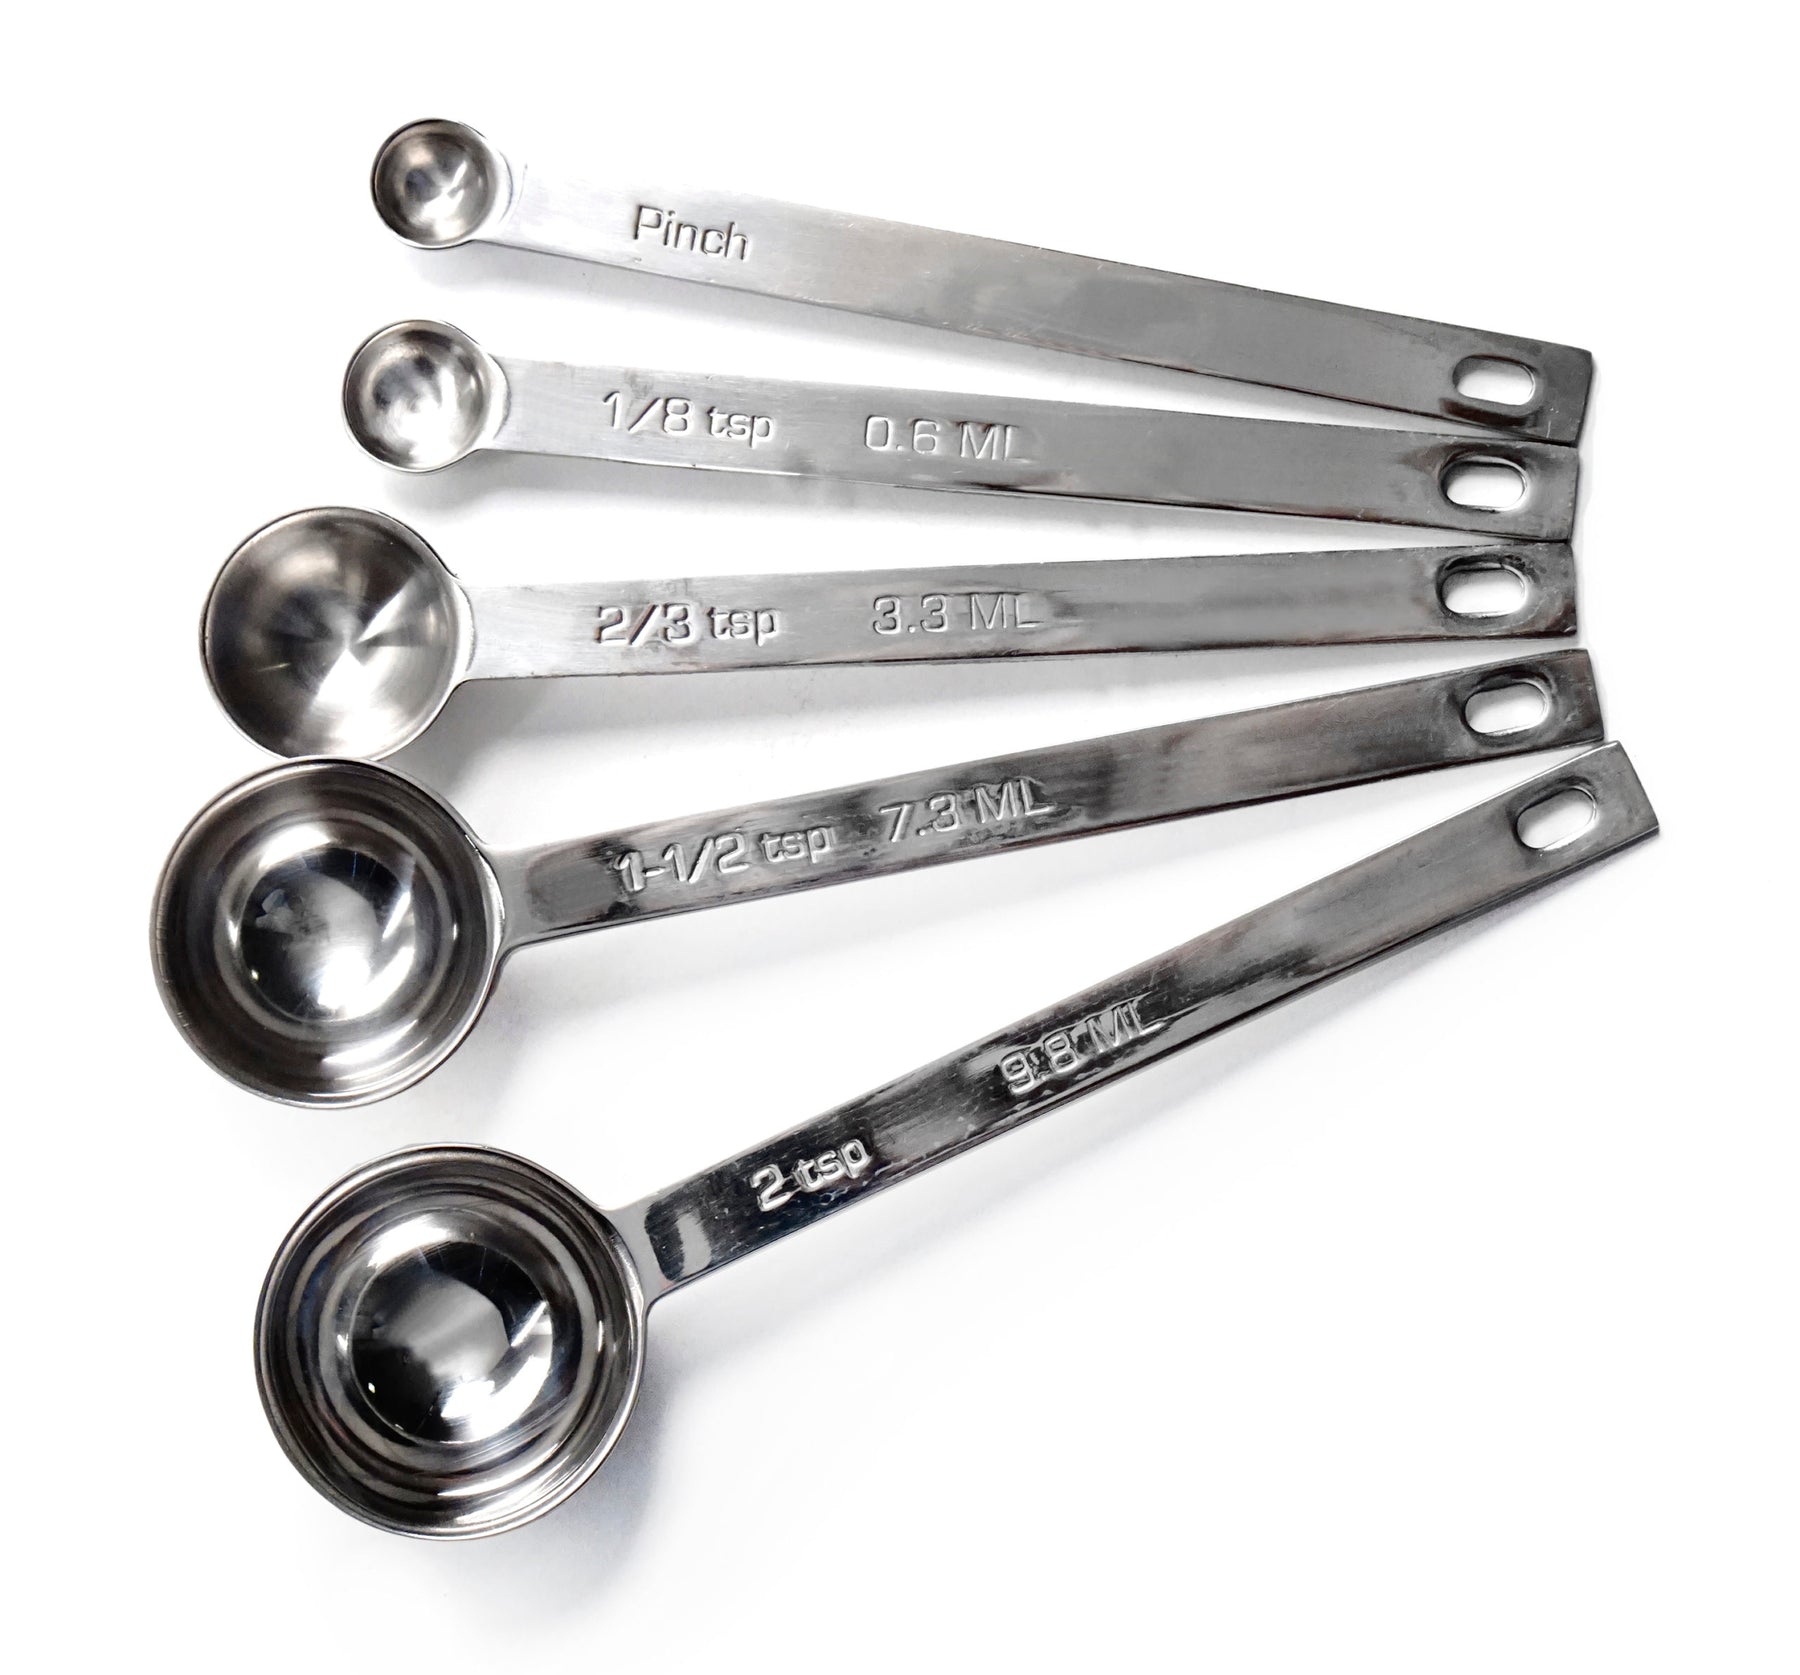 Odd Size Measuring Spoons: Set of 9 spoons ranging from a pinch to